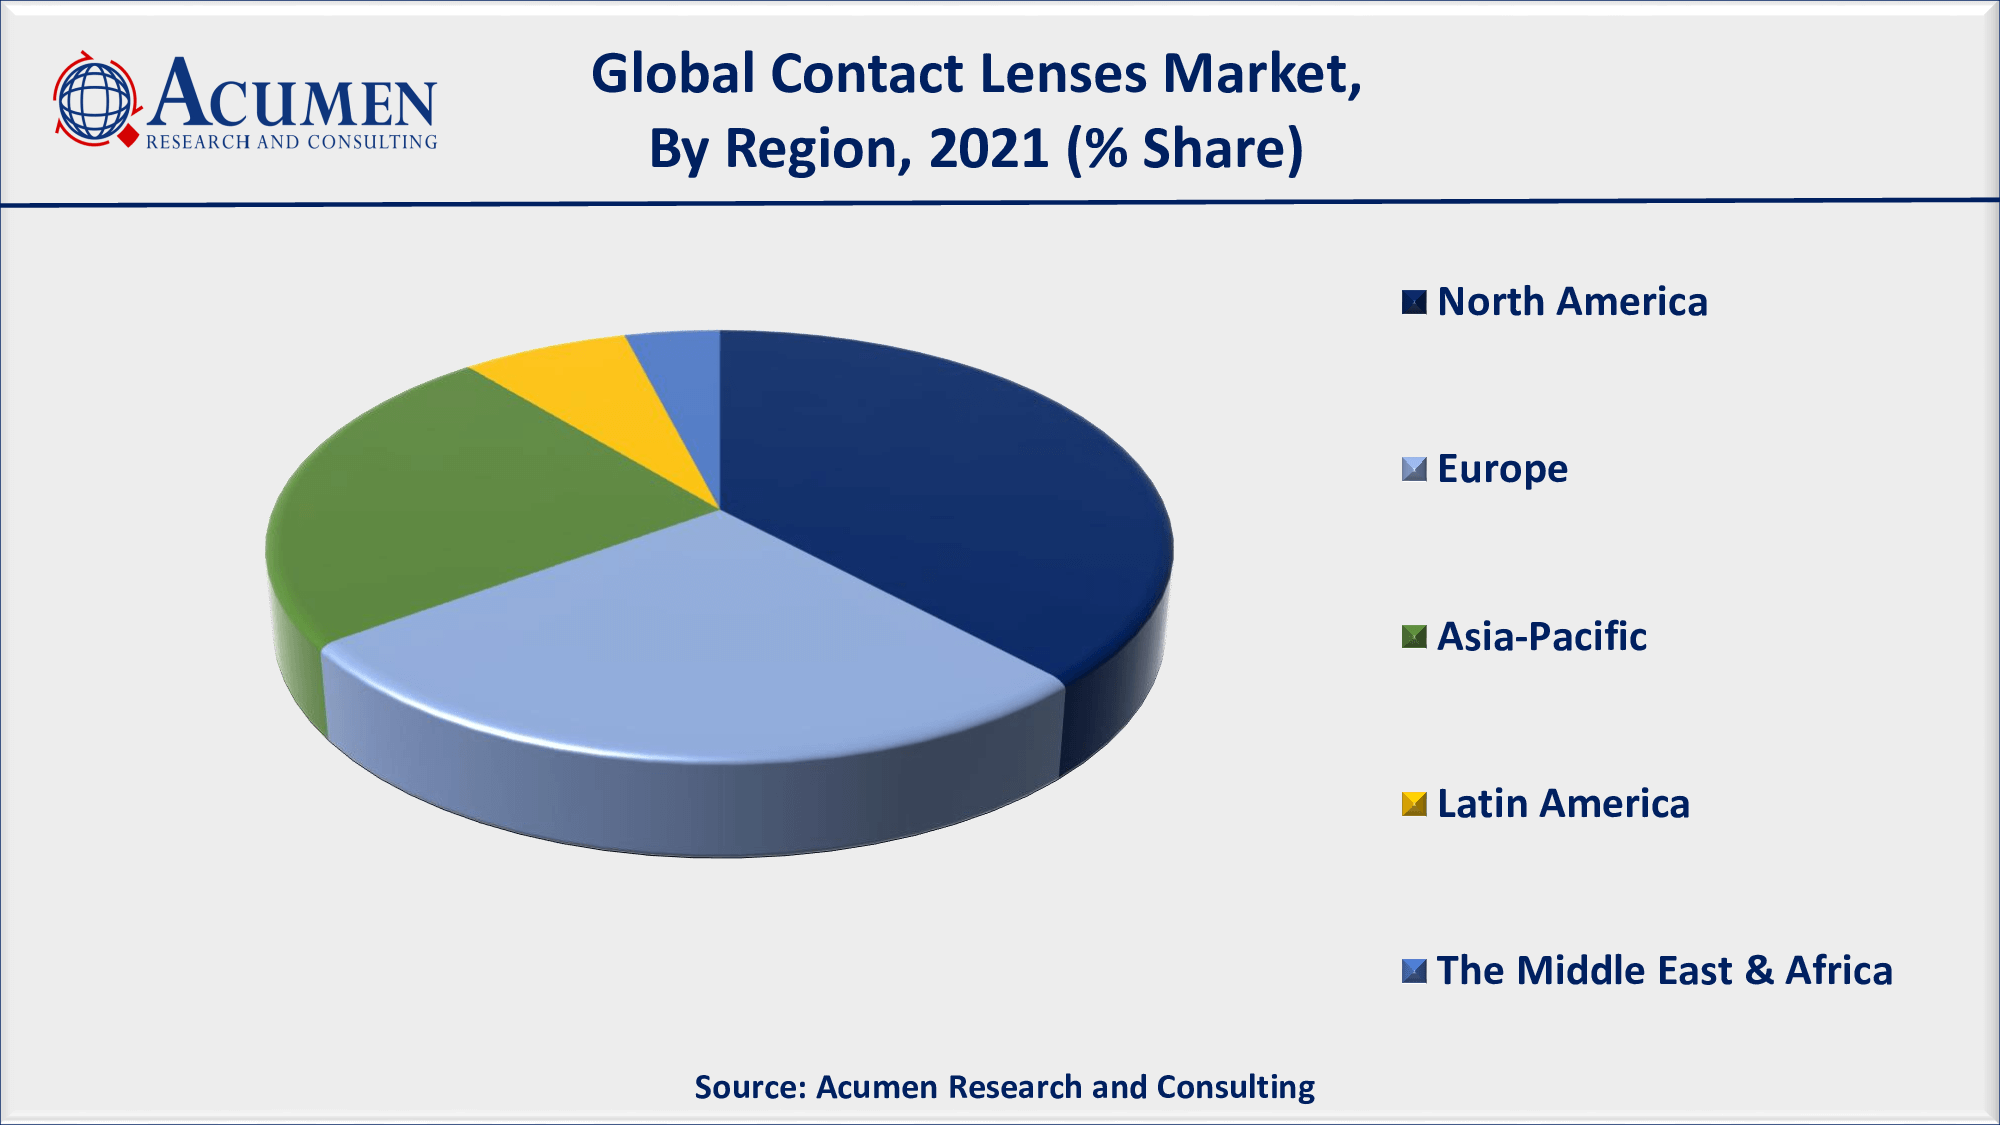 North America is the leading region with over 38% shares in 2021